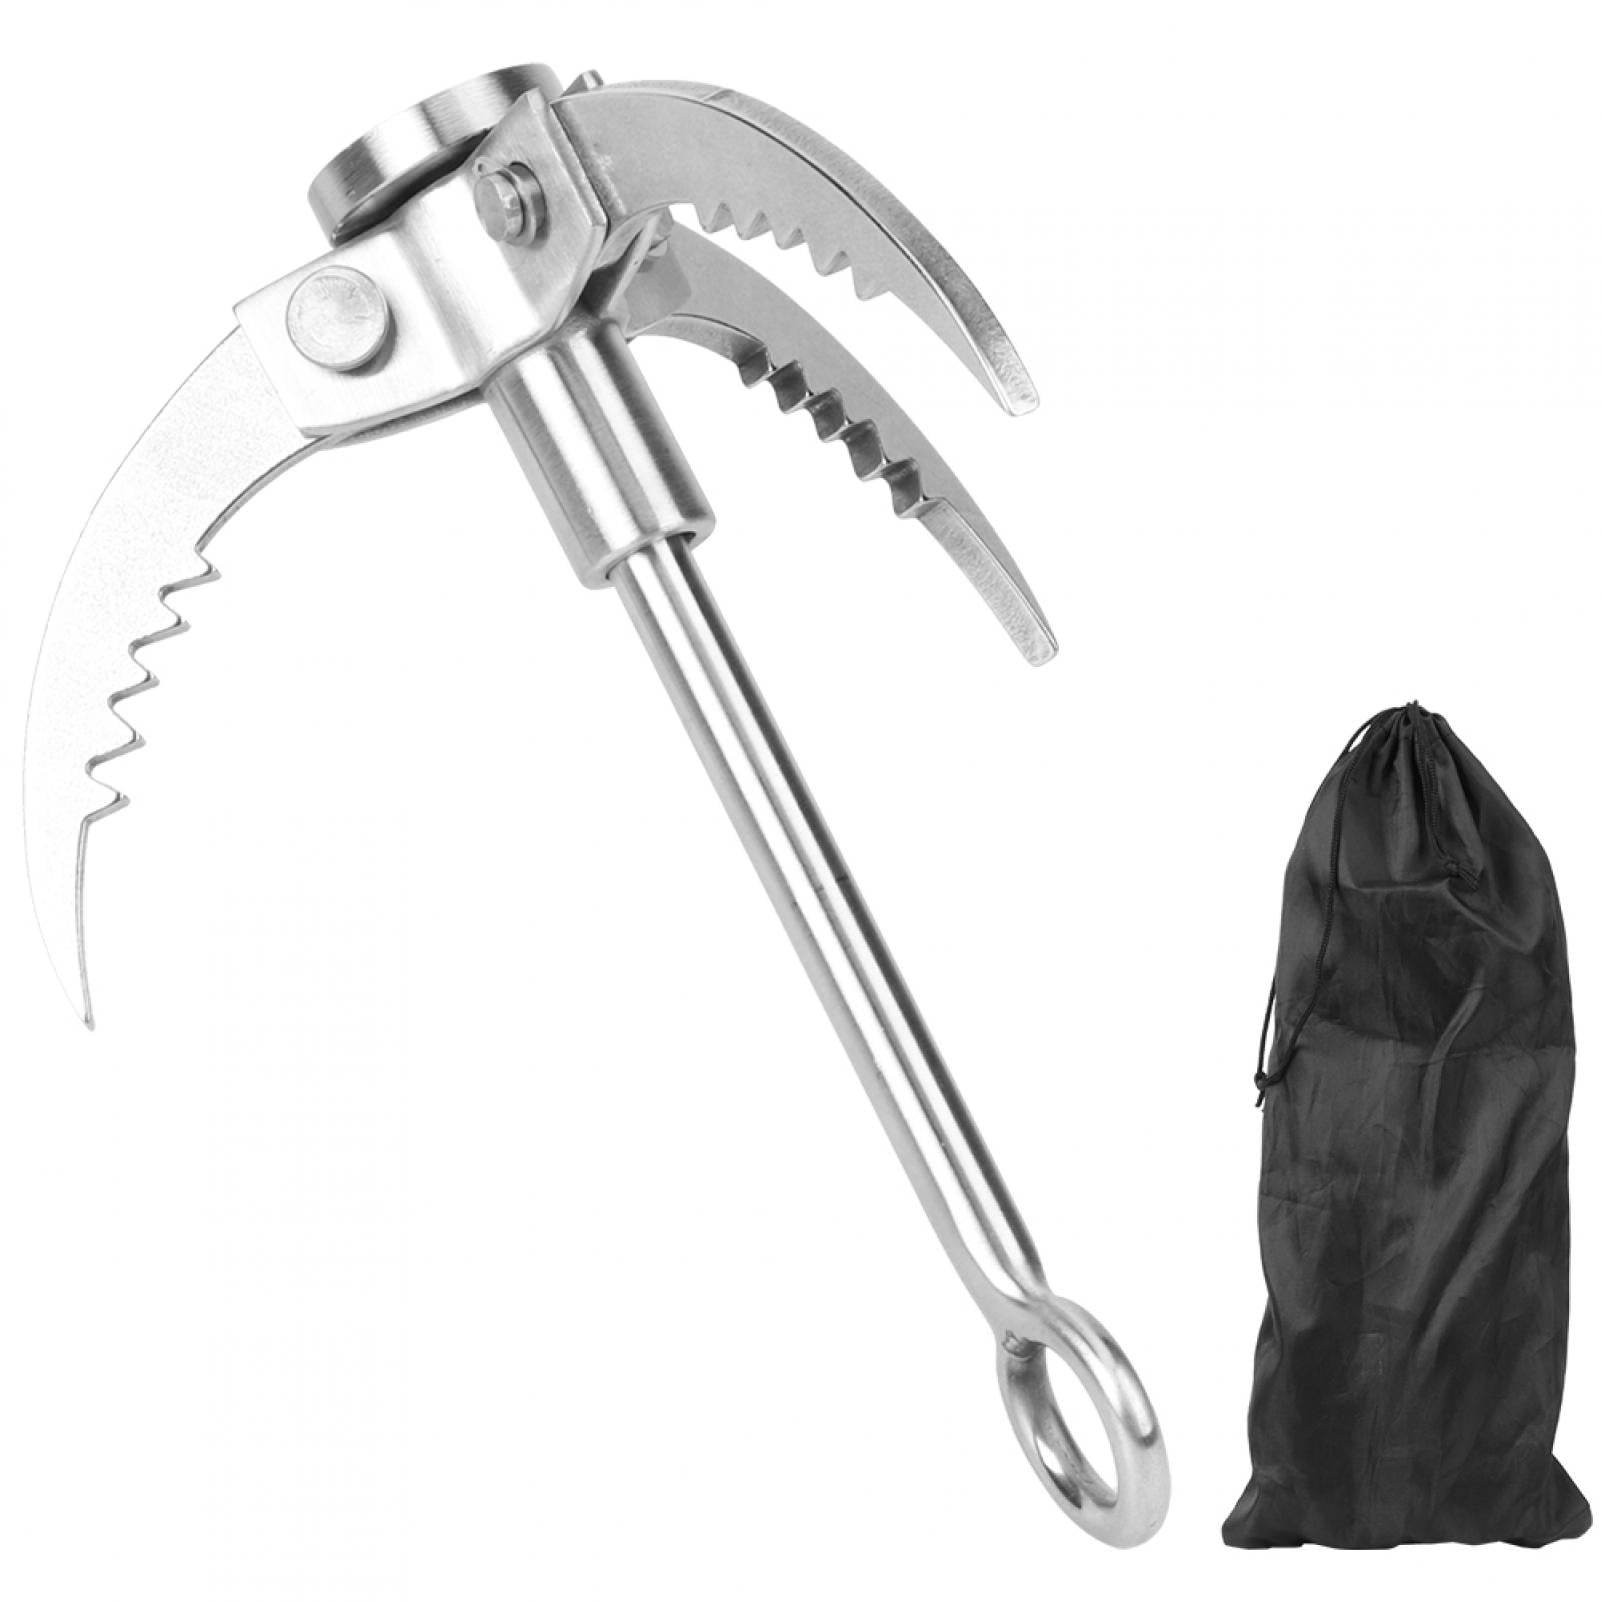 Folding Grappling Hook Survival 3 Claws Tool Stainless Steel Climbing Outdoors 